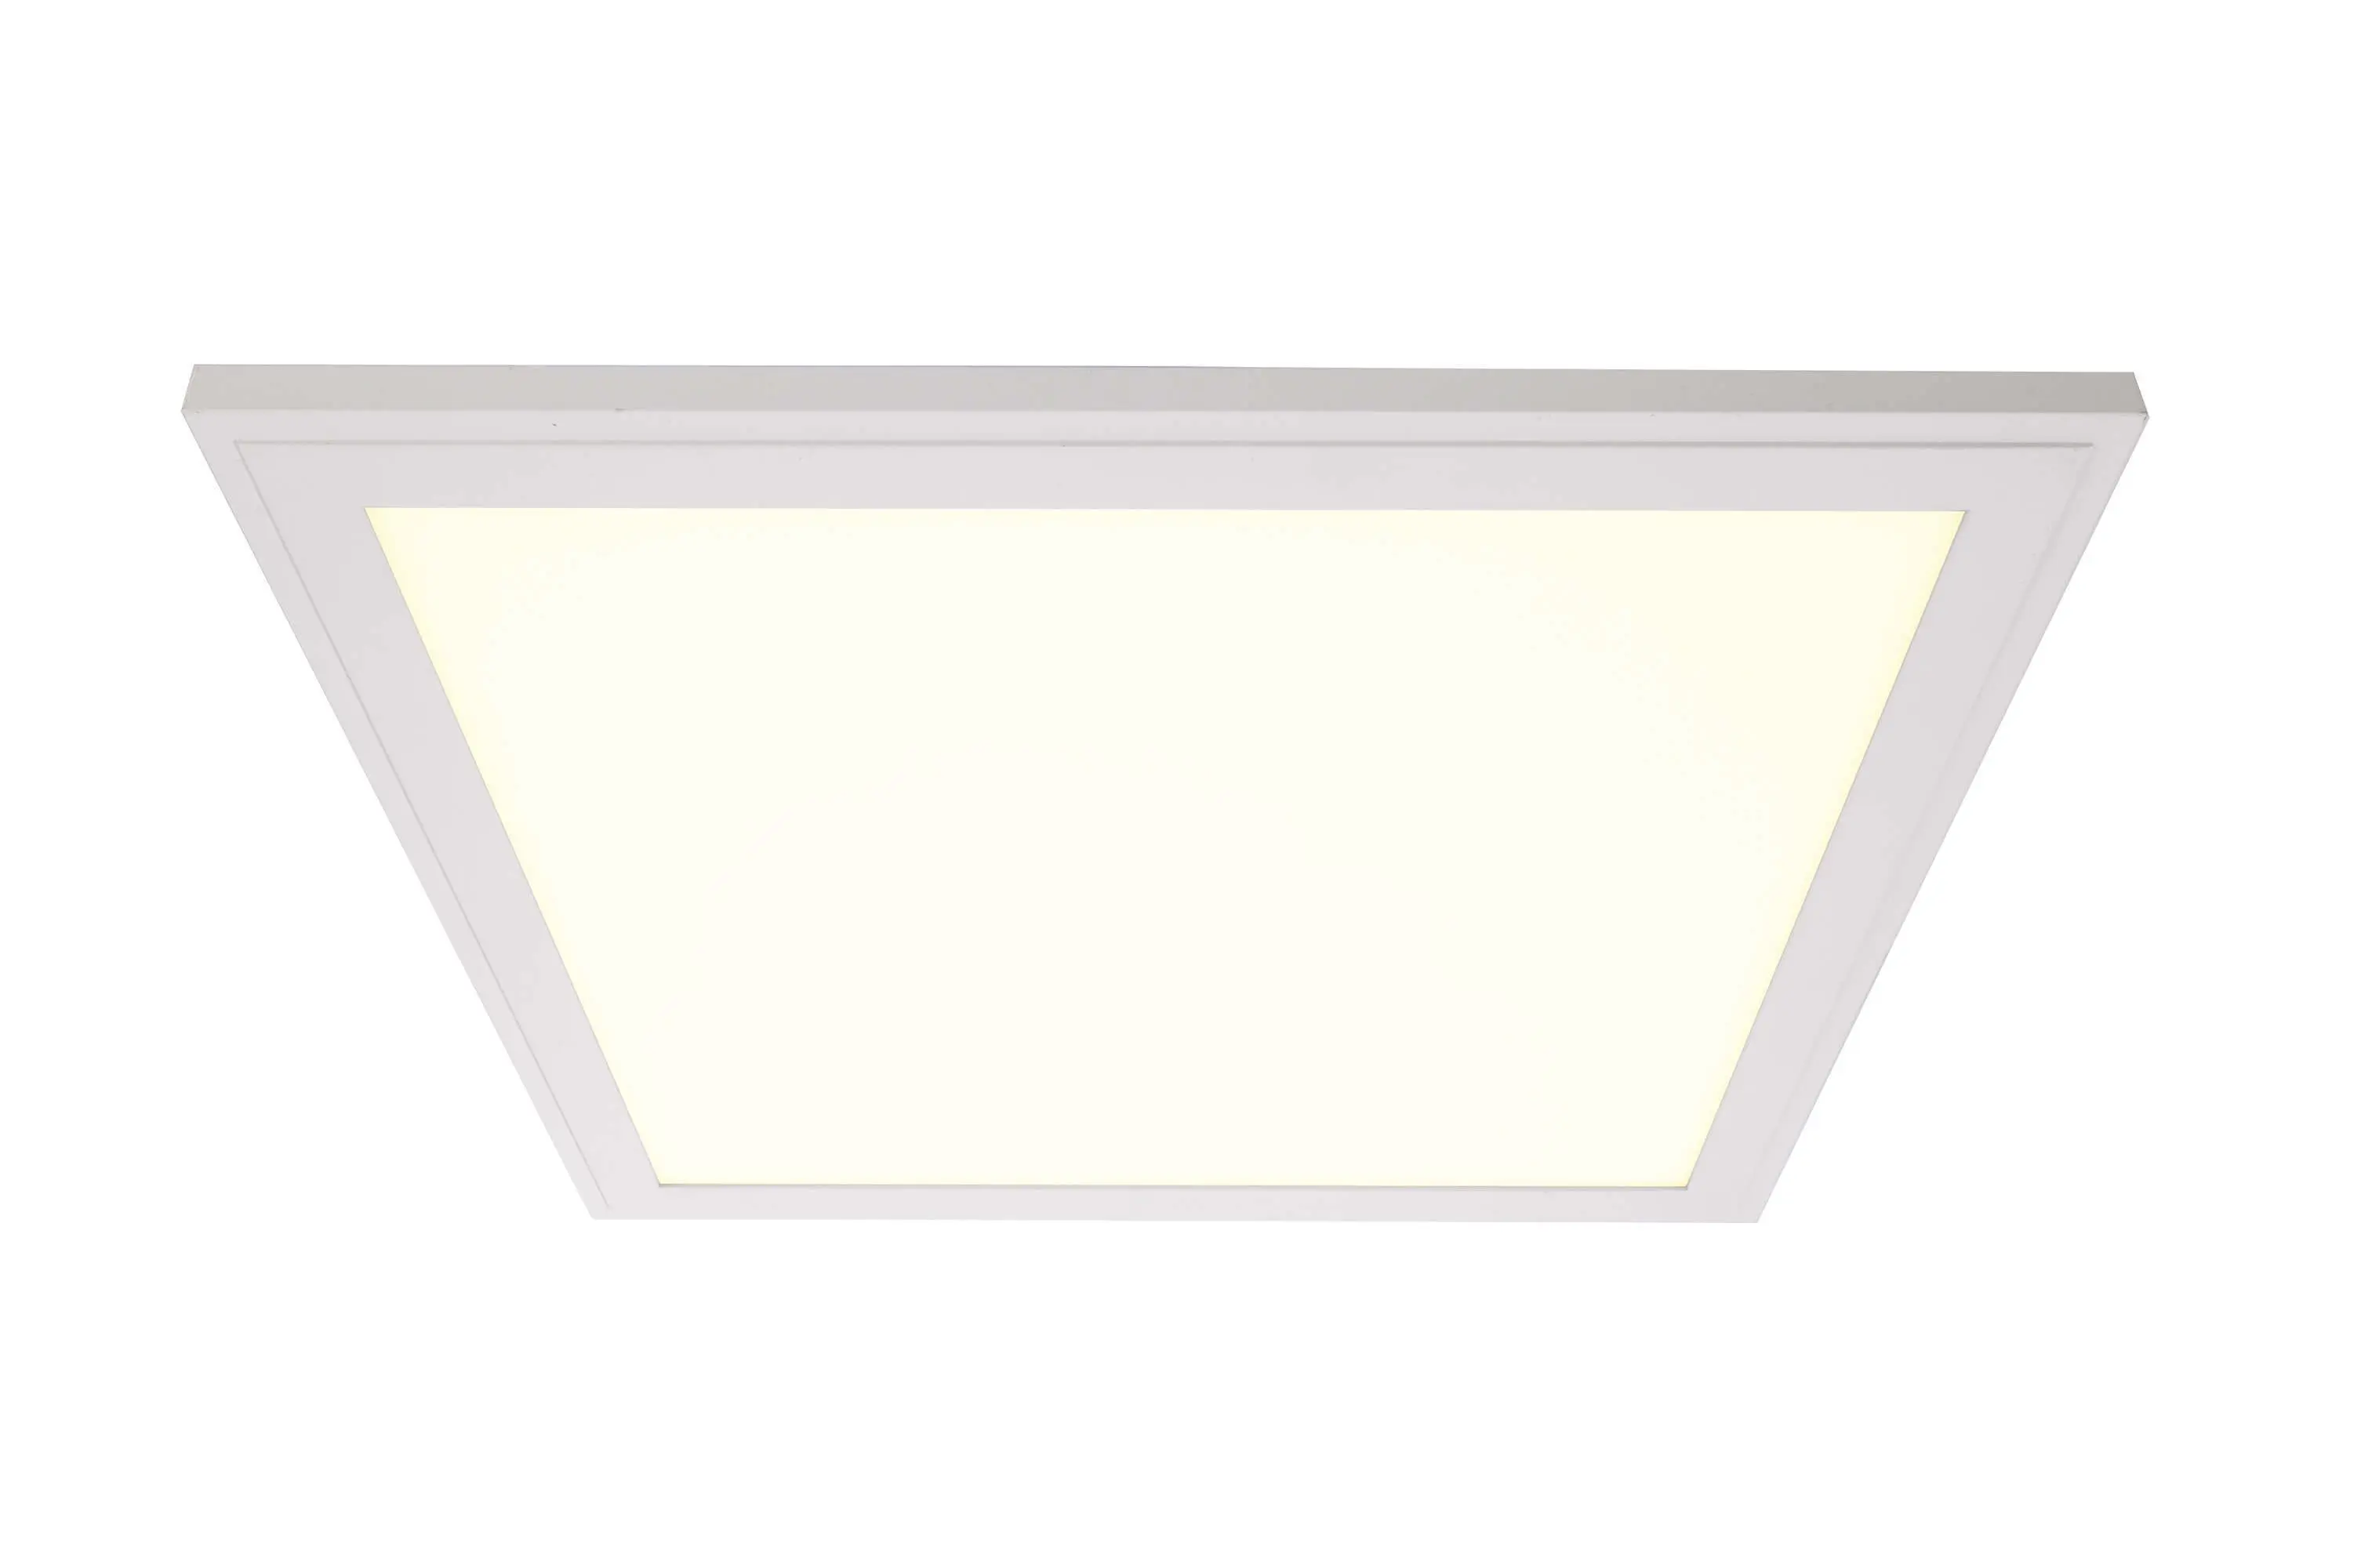 LED-Panel Small in weiß 24W, 3000K, 2500lm, 29.5x29.5cm